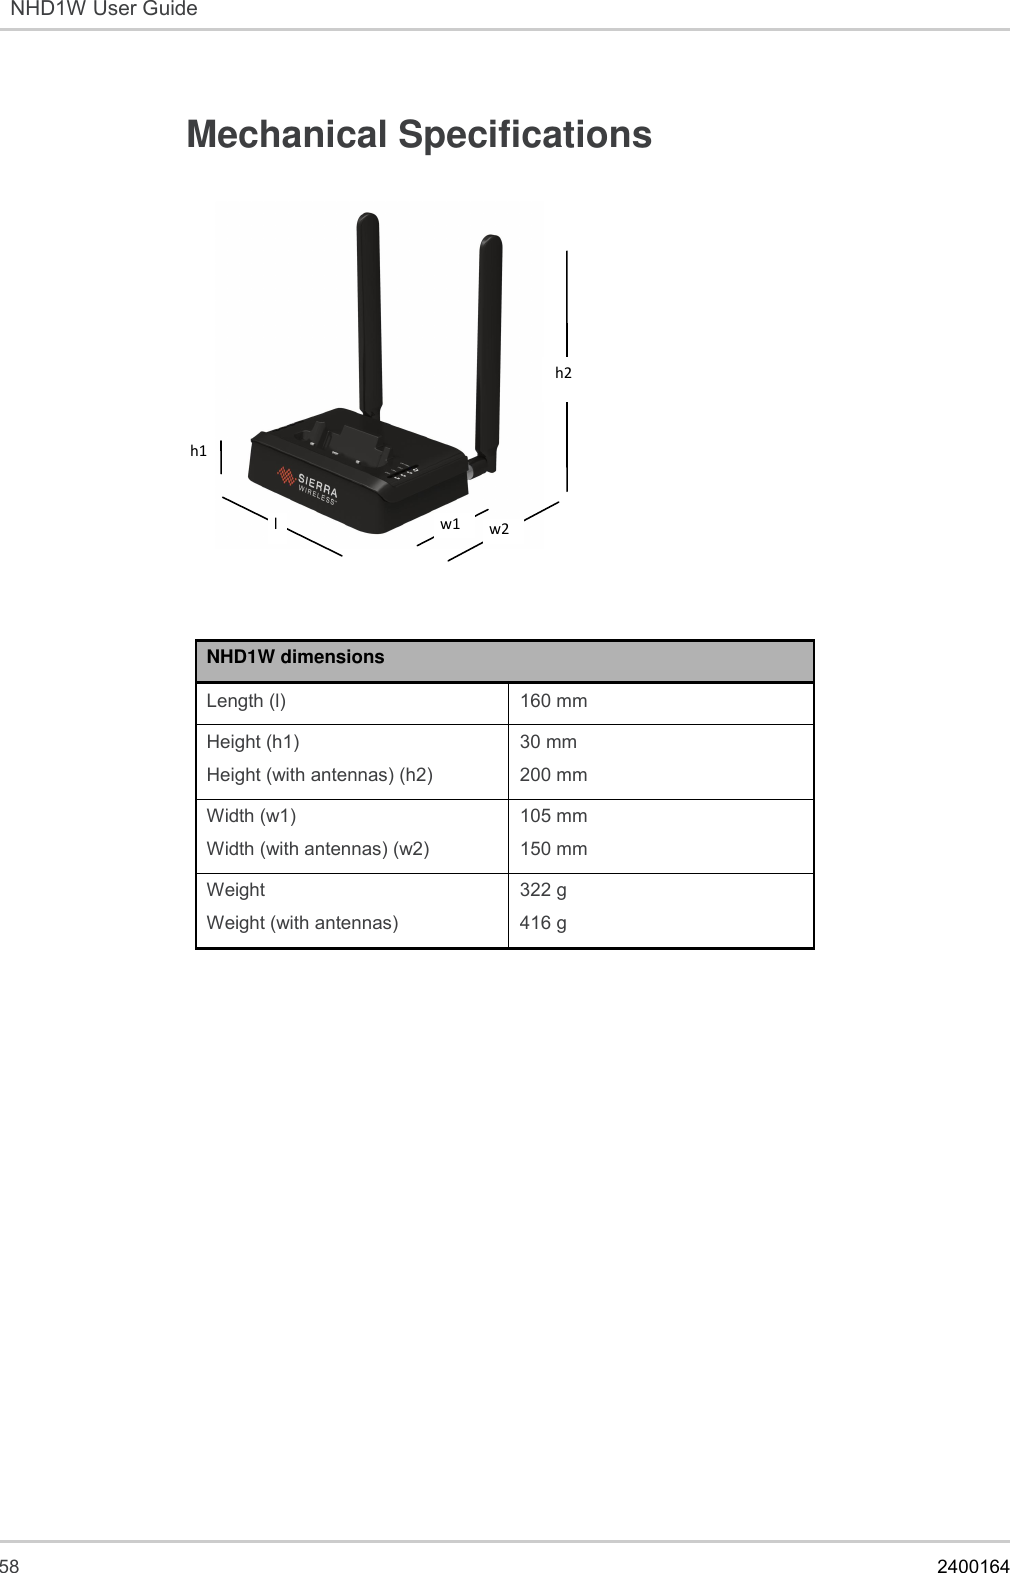  58    2400164  NHD1W User Guide   Mechanical Specifications                  NHD1W dimensions Length (l) 160 mm Height (h1) Height (with antennas) (h2) 30 mm 200 mm Width (w1) Width (with antennas) (w2) 105 mm 150 mm Weight  Weight (with antennas) 322 g 416 g    w2   h2 w1 h1 l 